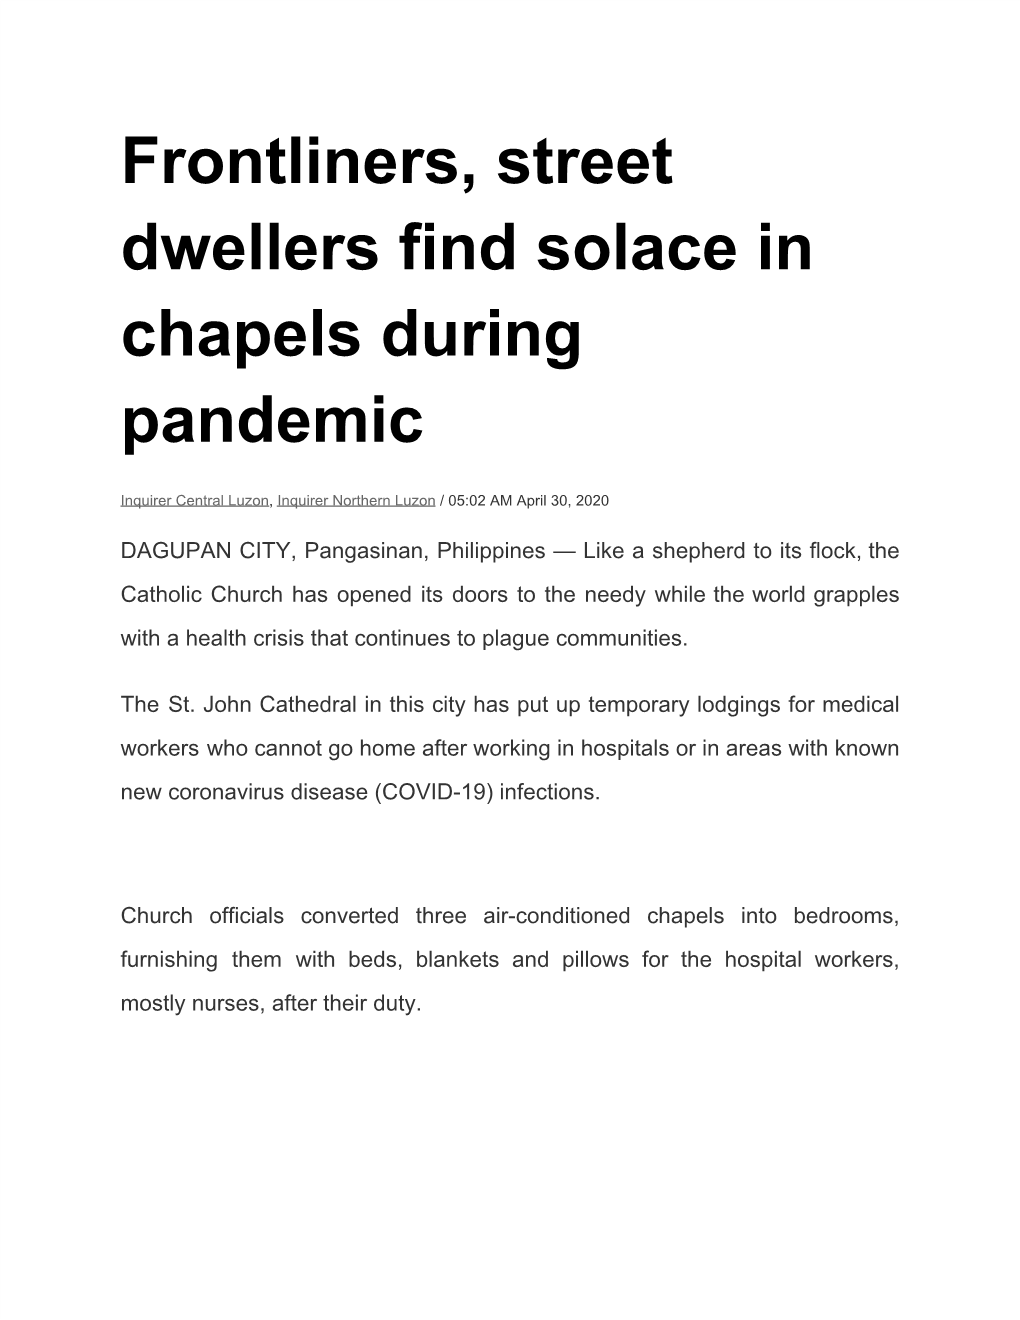 Frontliners, Street Dwellers Find Solace in Chapels During Pandemic